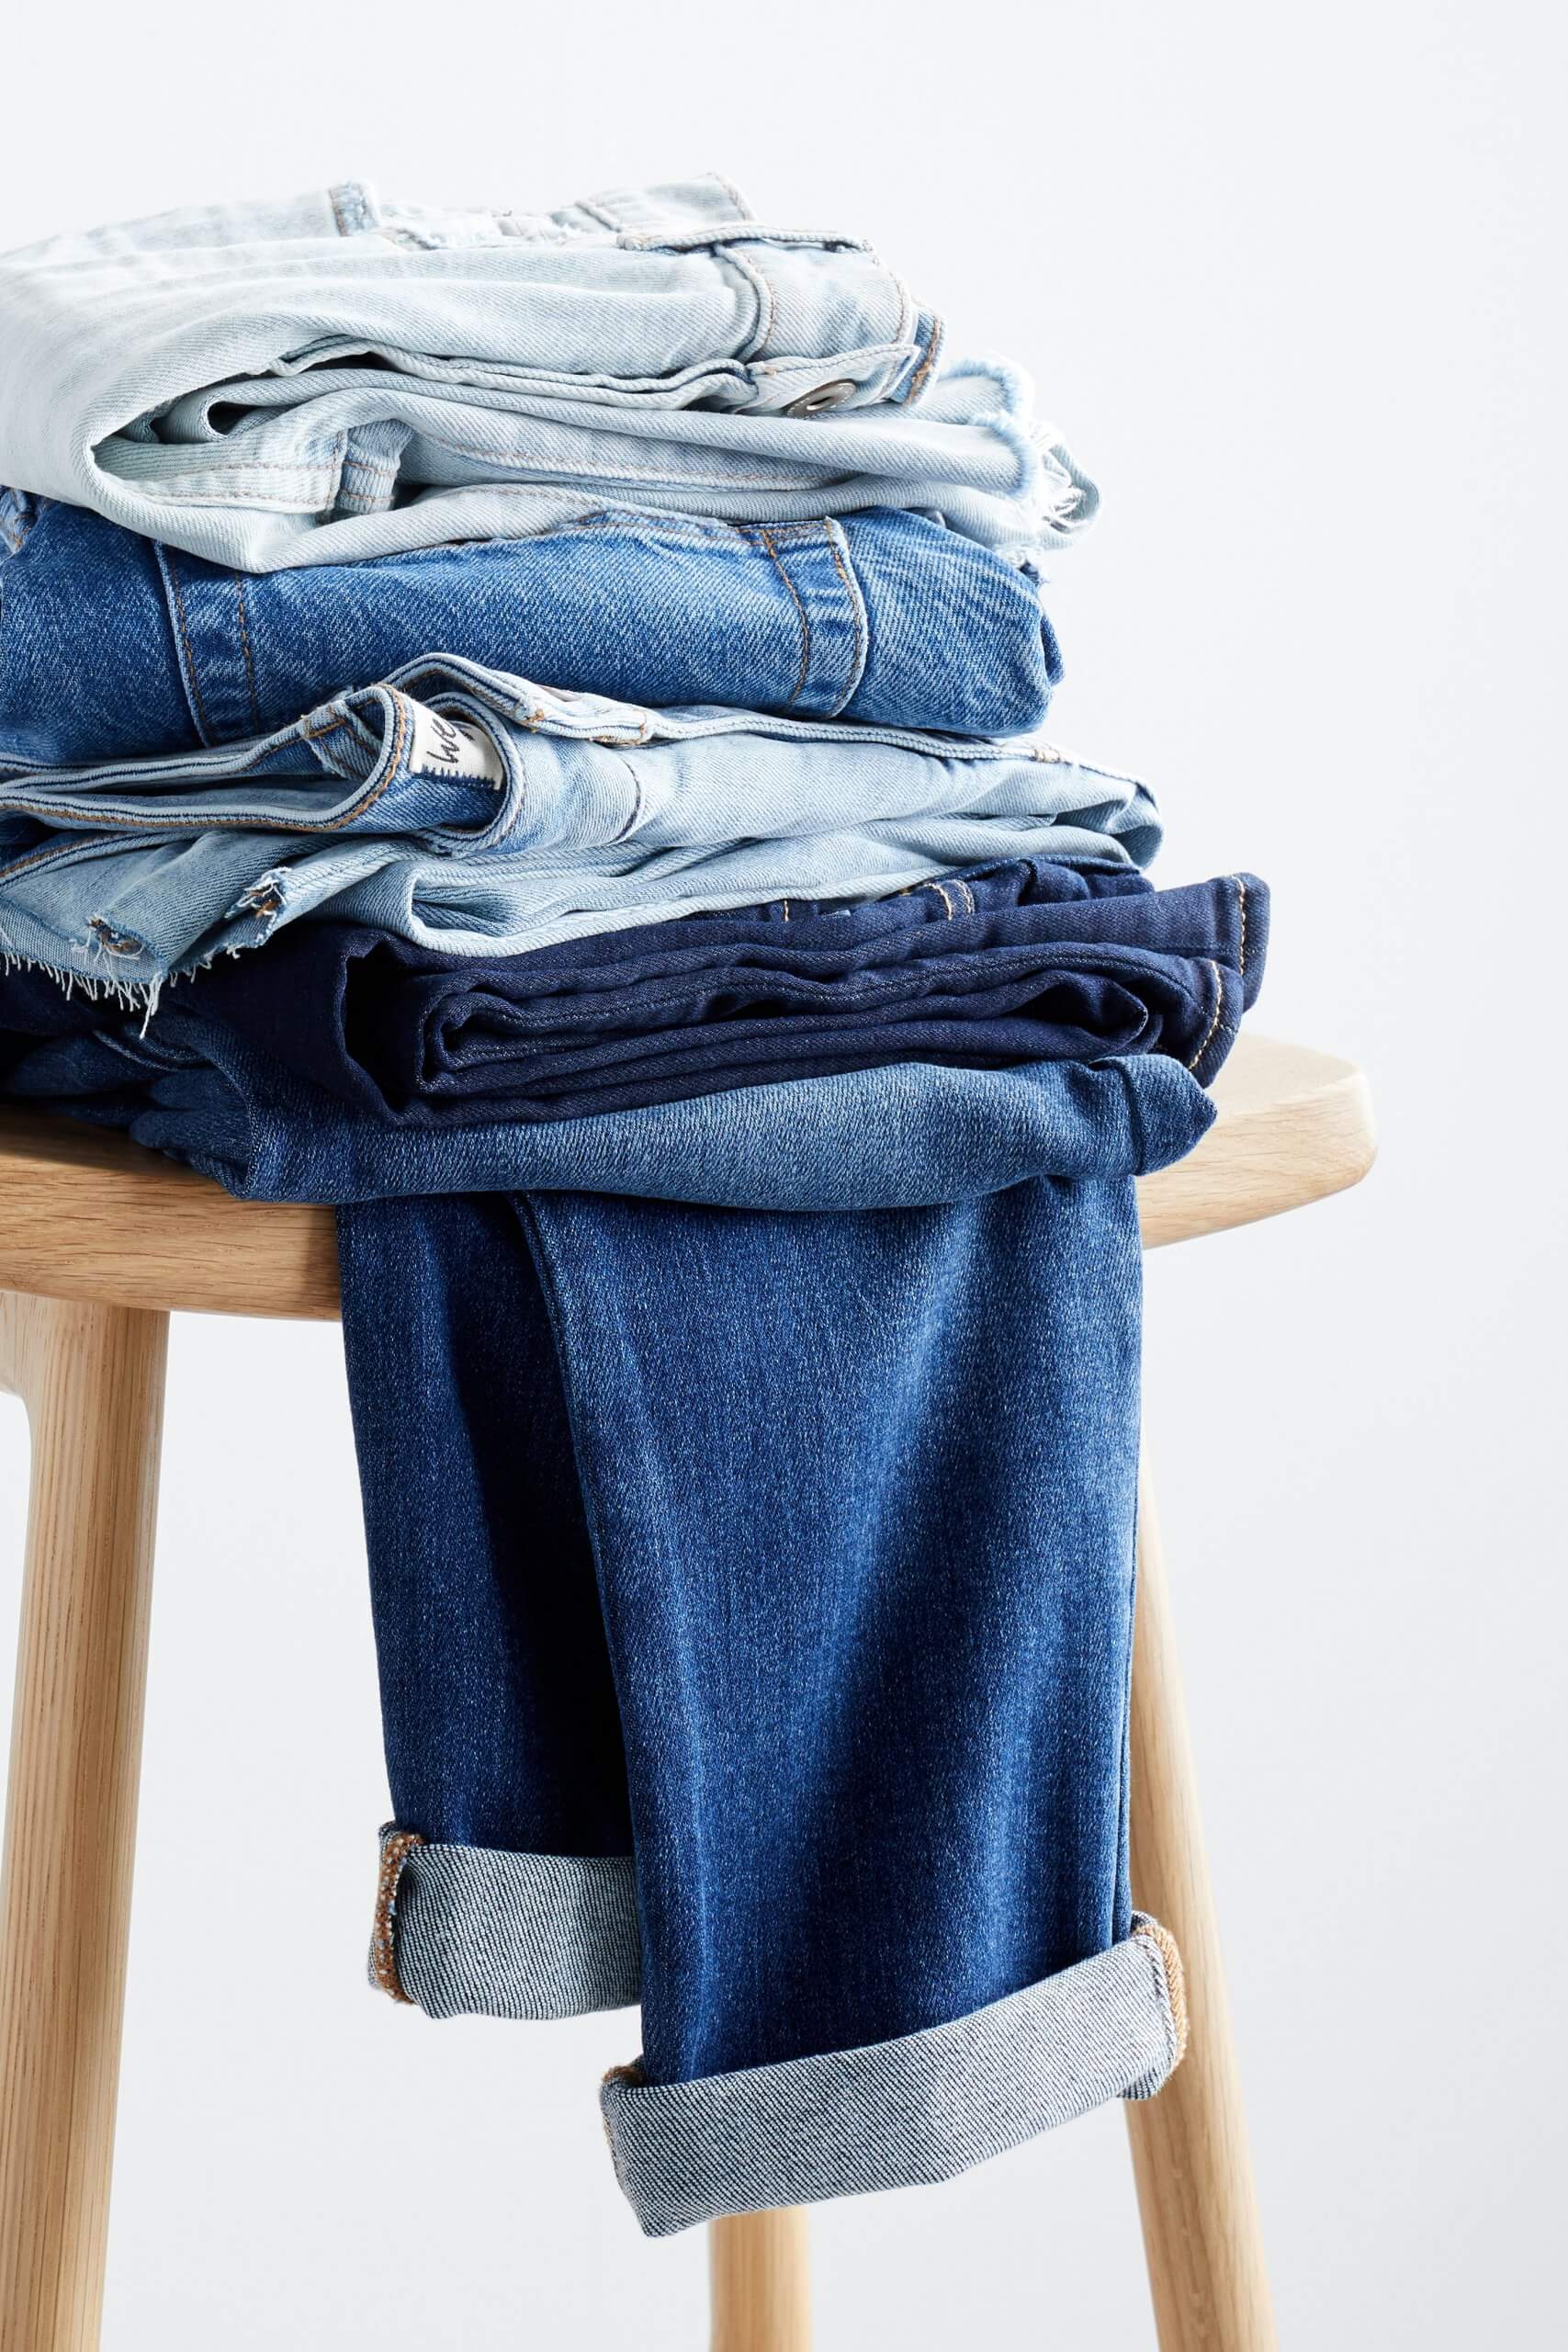 Stitch Fix women’s blue jeans in various washes folded and stacked on a wooden stool.